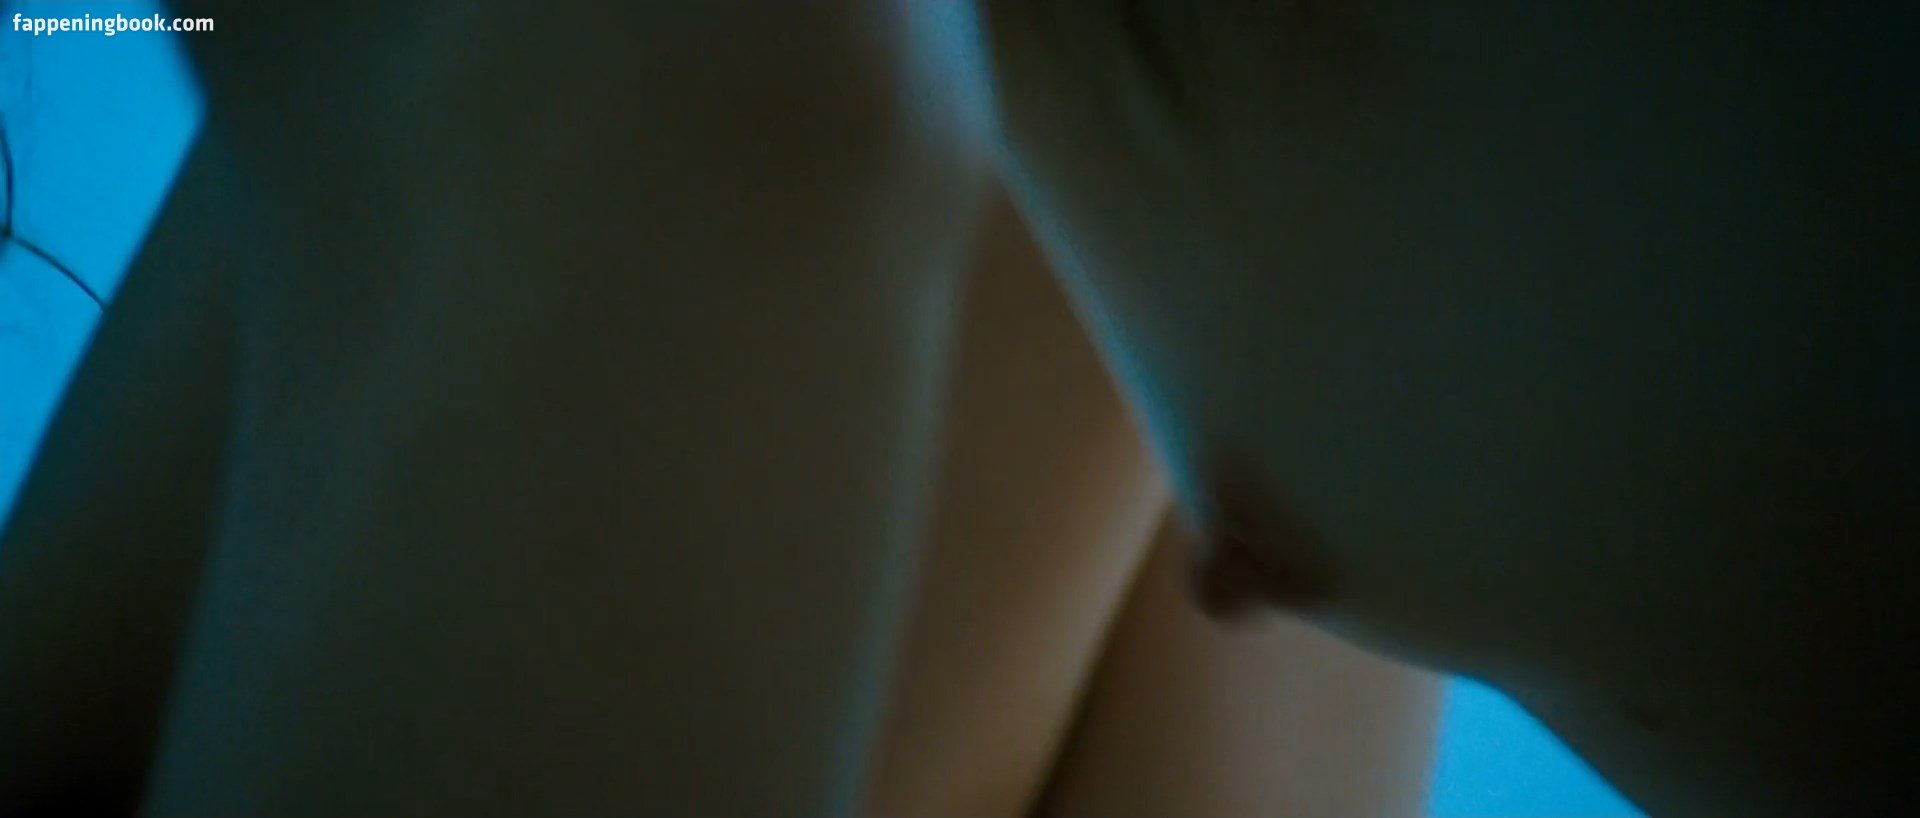 Charlotte Gainsbourg Nude, The Fappening - Photo #109736 - FappeningBook.